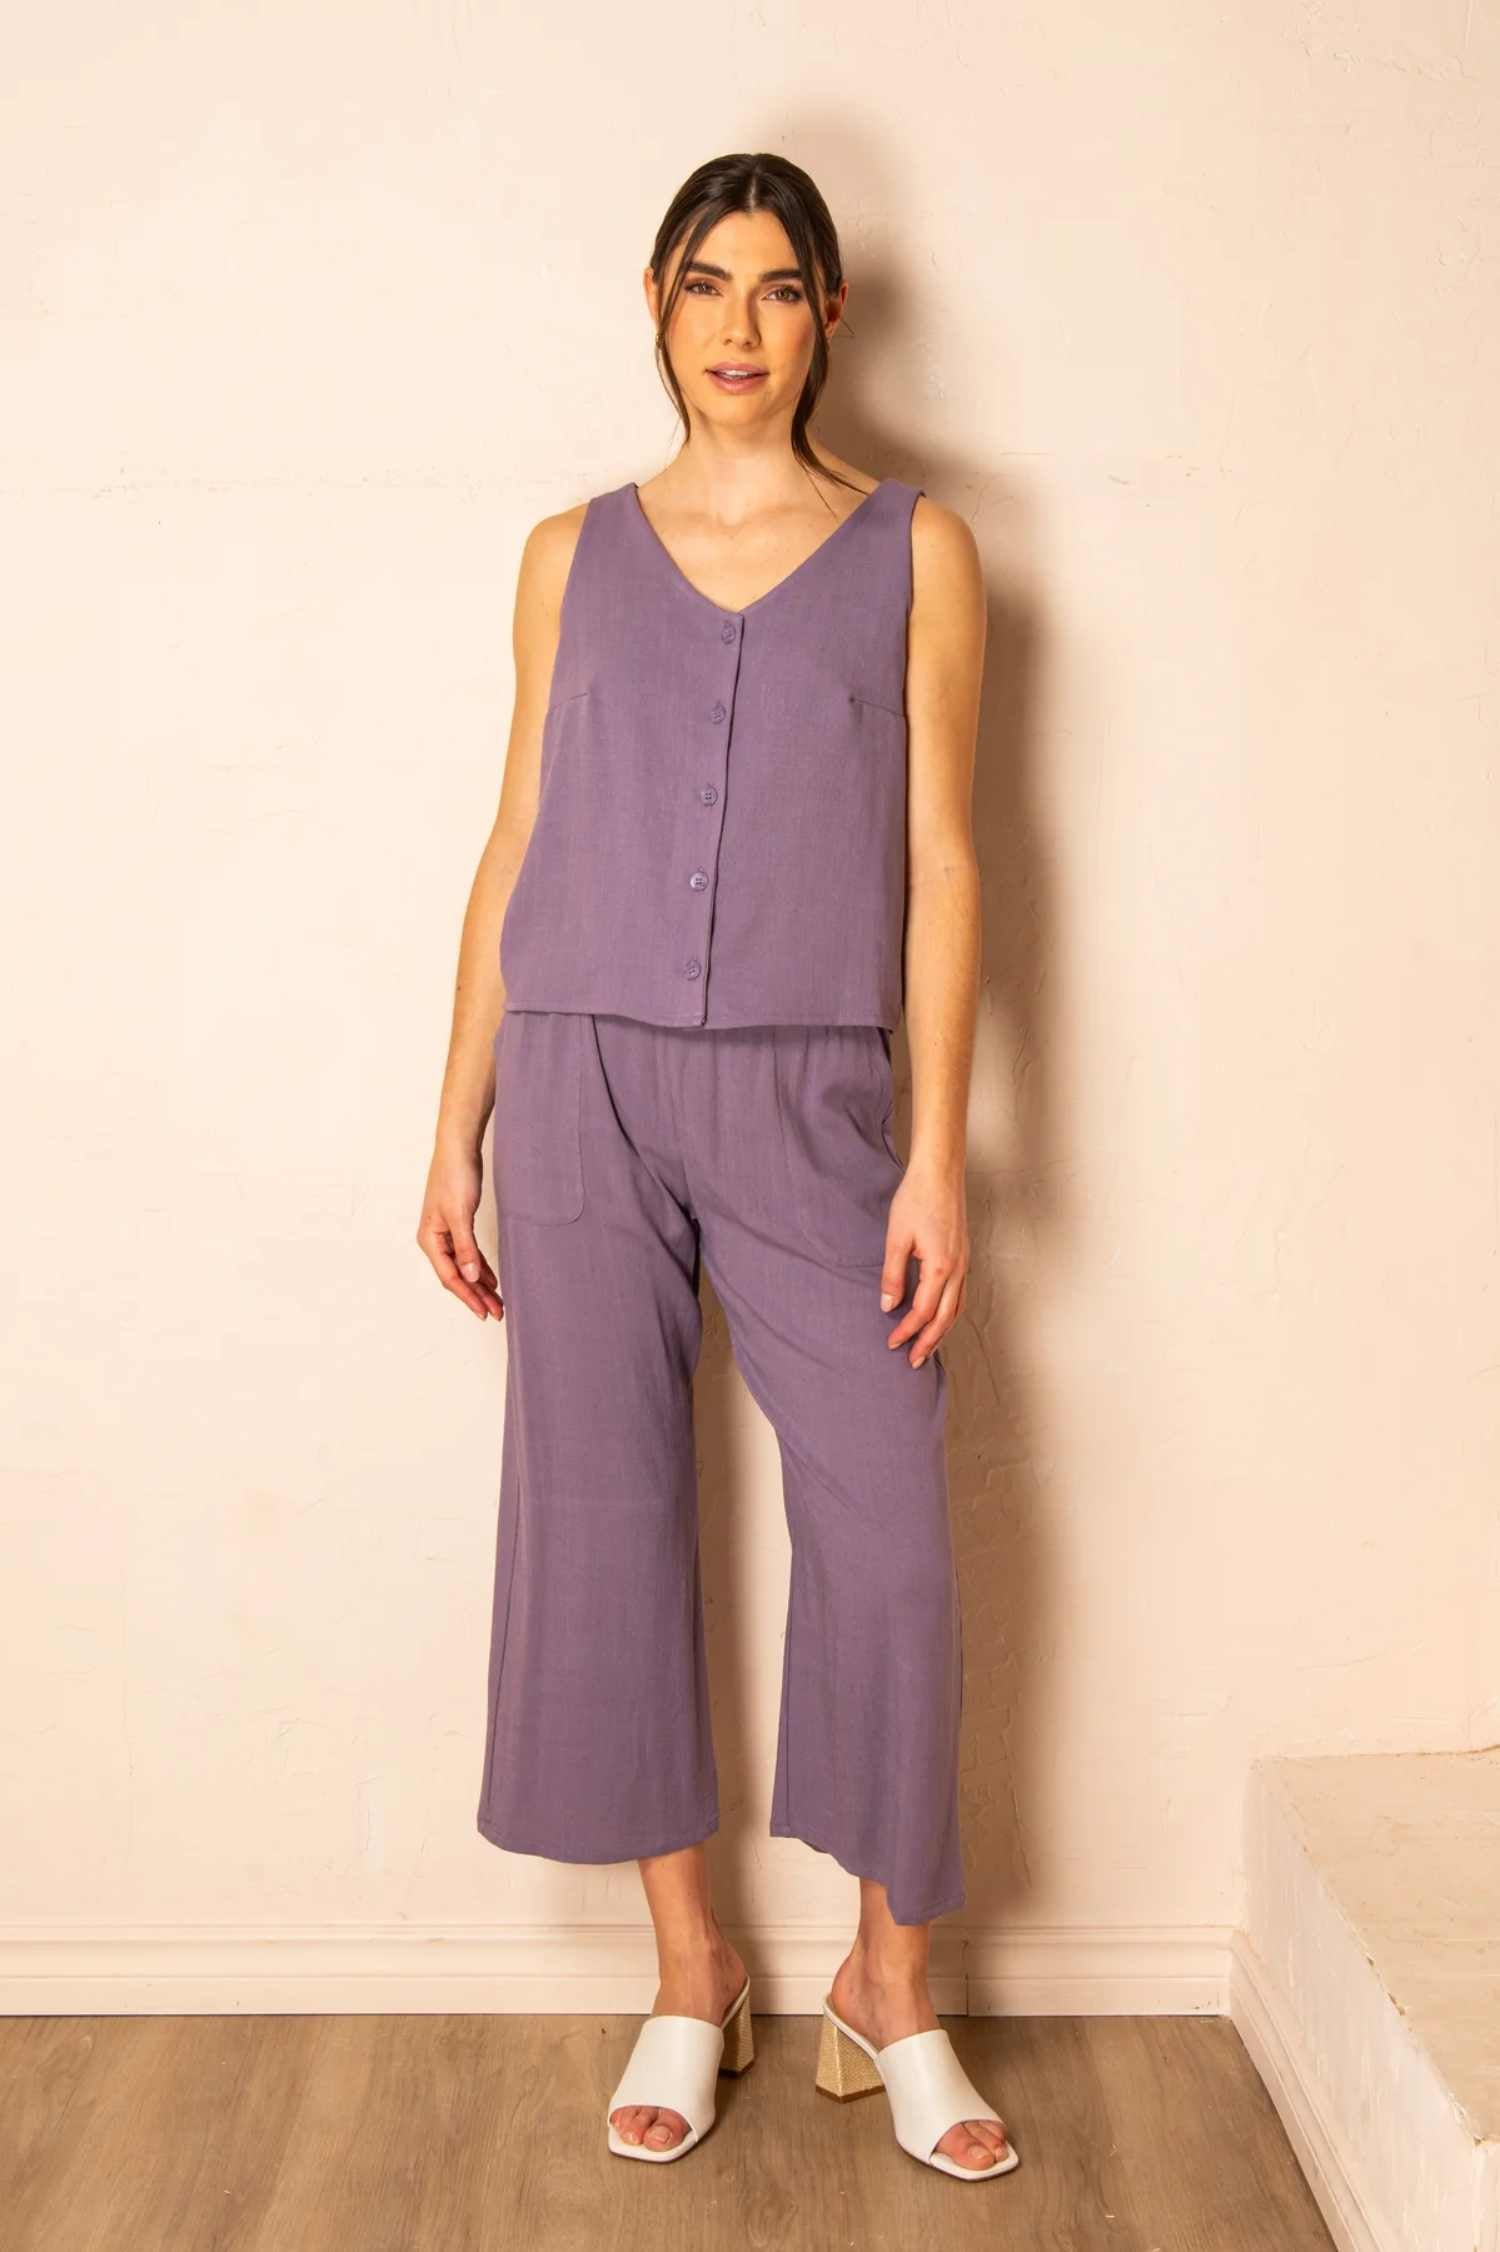 Photo of a woman wearing the Serenity Pants by Cherry Bobin in Mauve, standing in front of a wall 